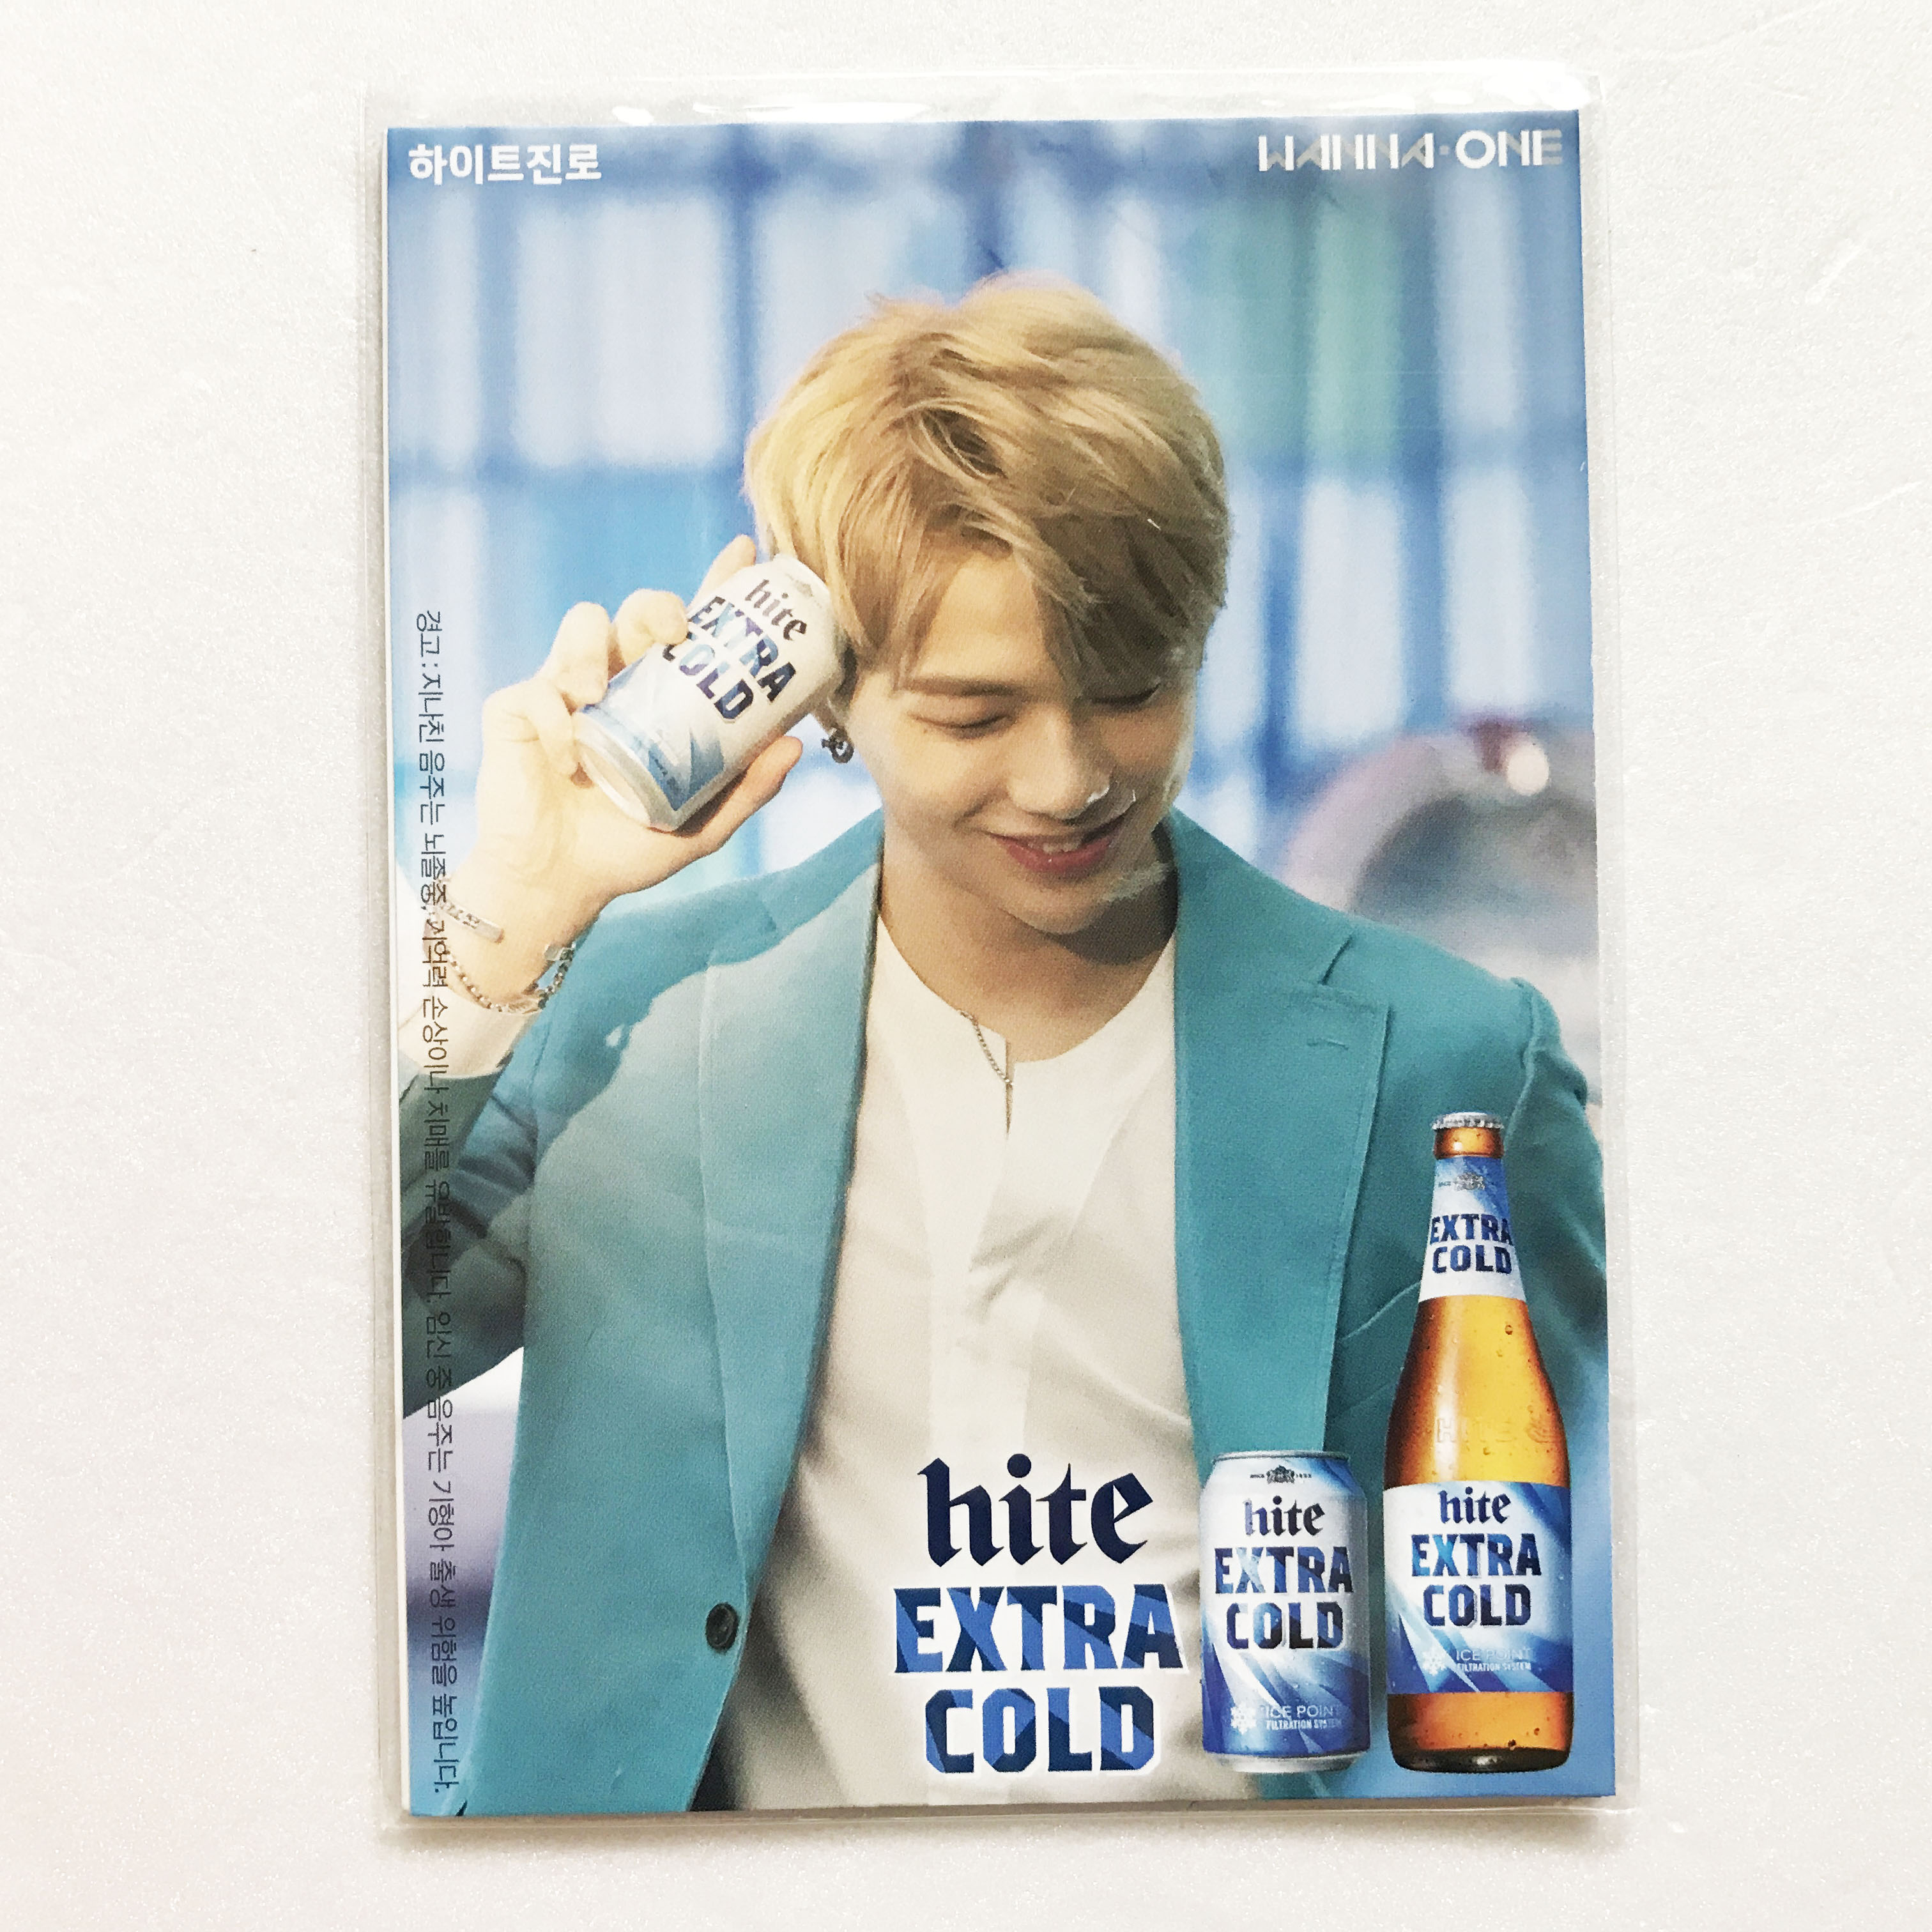 Produce 101 Project Group Wanna 【新作入荷!!】 One HITE 冬バーゲン 特別送料無料 x Promotional Postcard Extra Cold